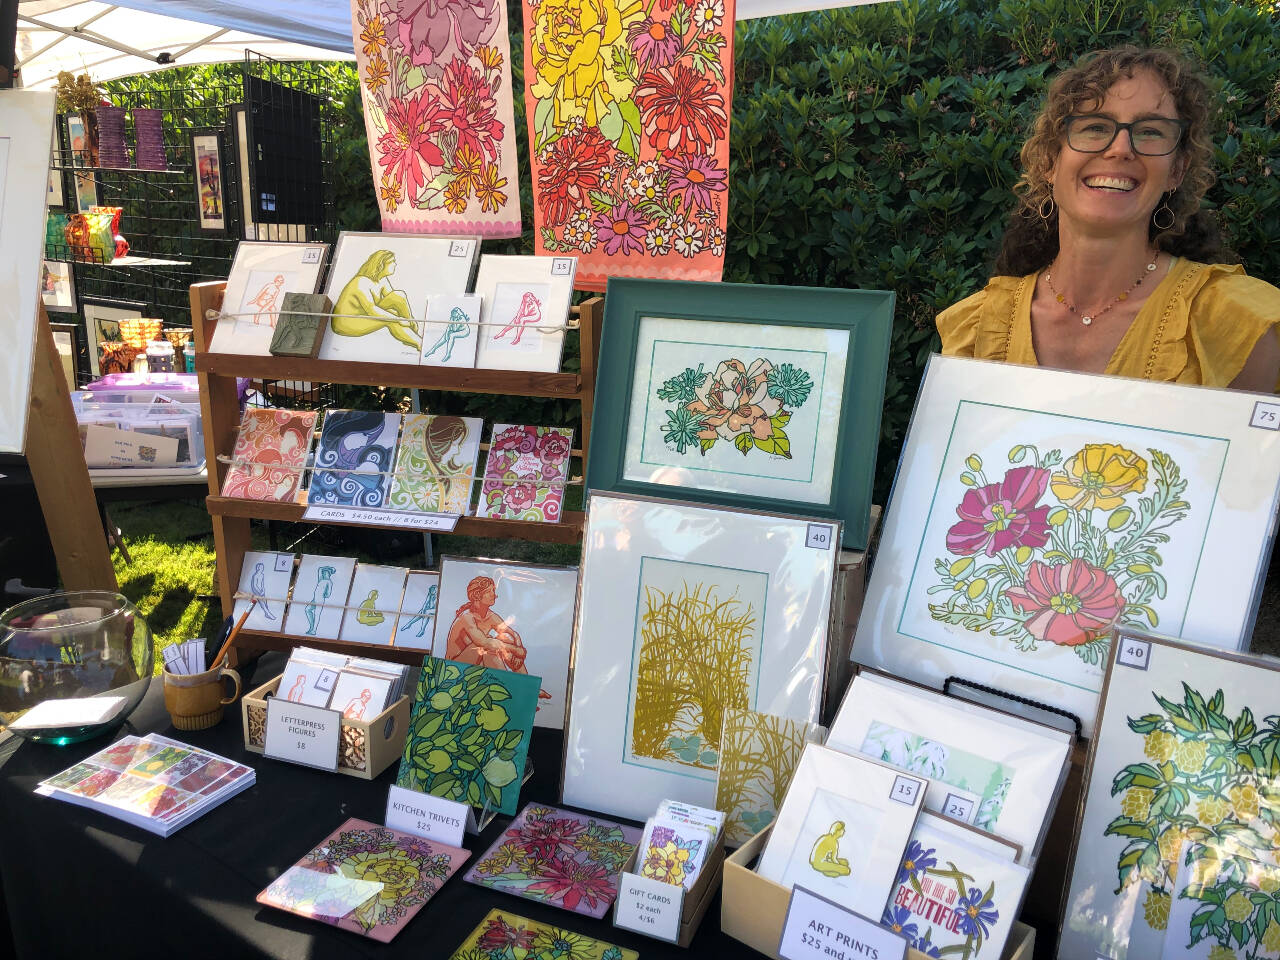 Katie Dean was among several artists whose work was on display and for sale at the FUSION summer arts festival in August 2021. Her letterpress work focuses on a vibrant color palette and botanical themes.